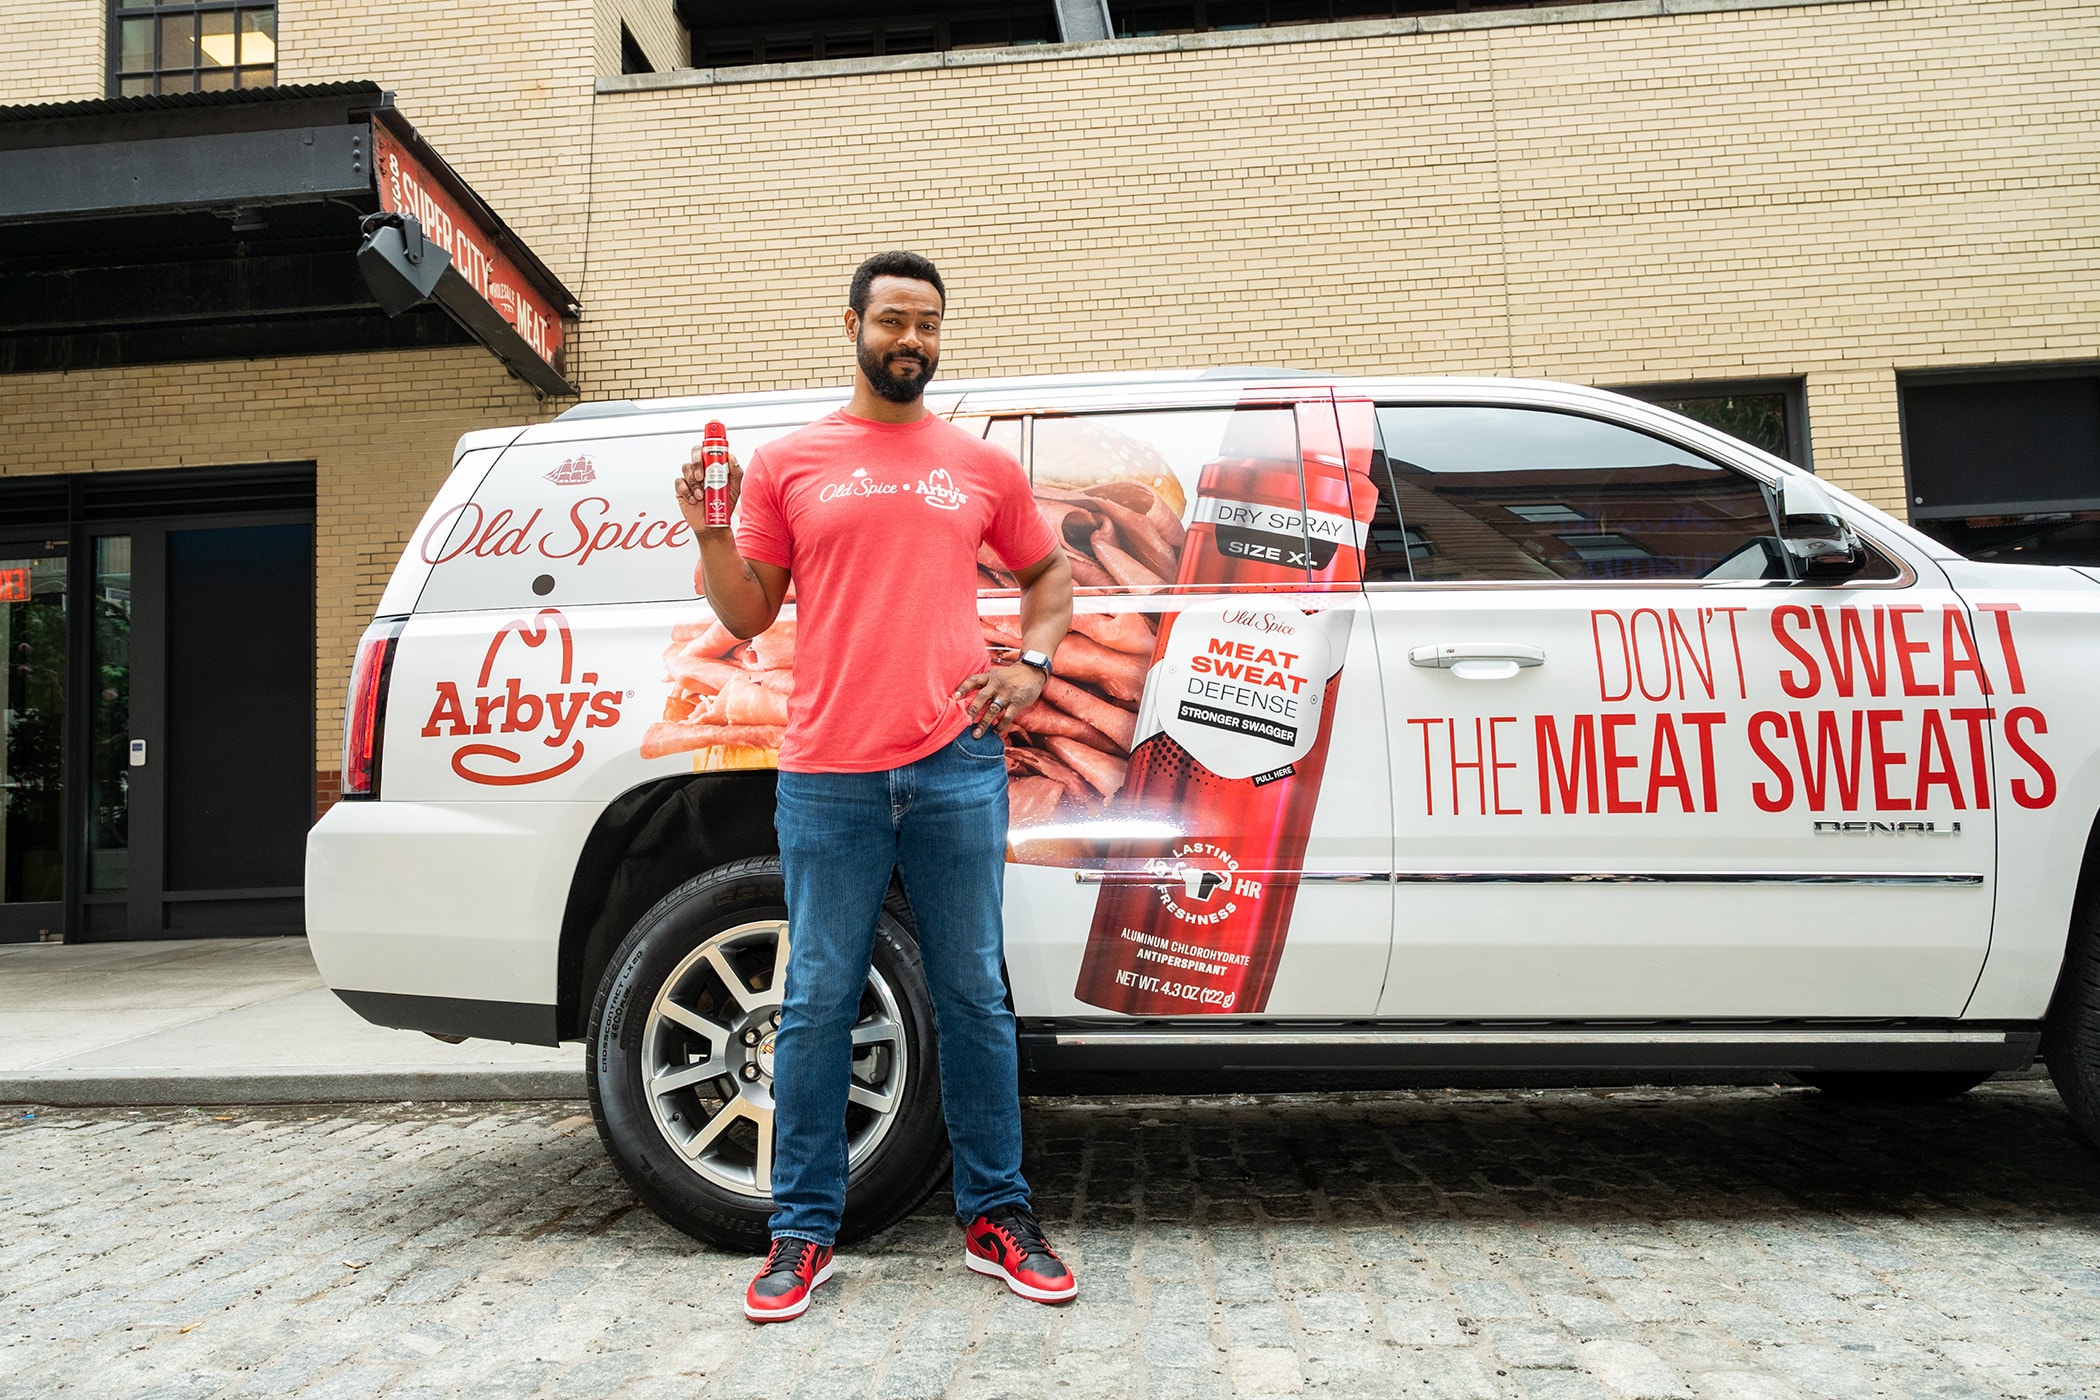 Arby's x Old Spice Meat Sweat Kit Collaboration Apparel